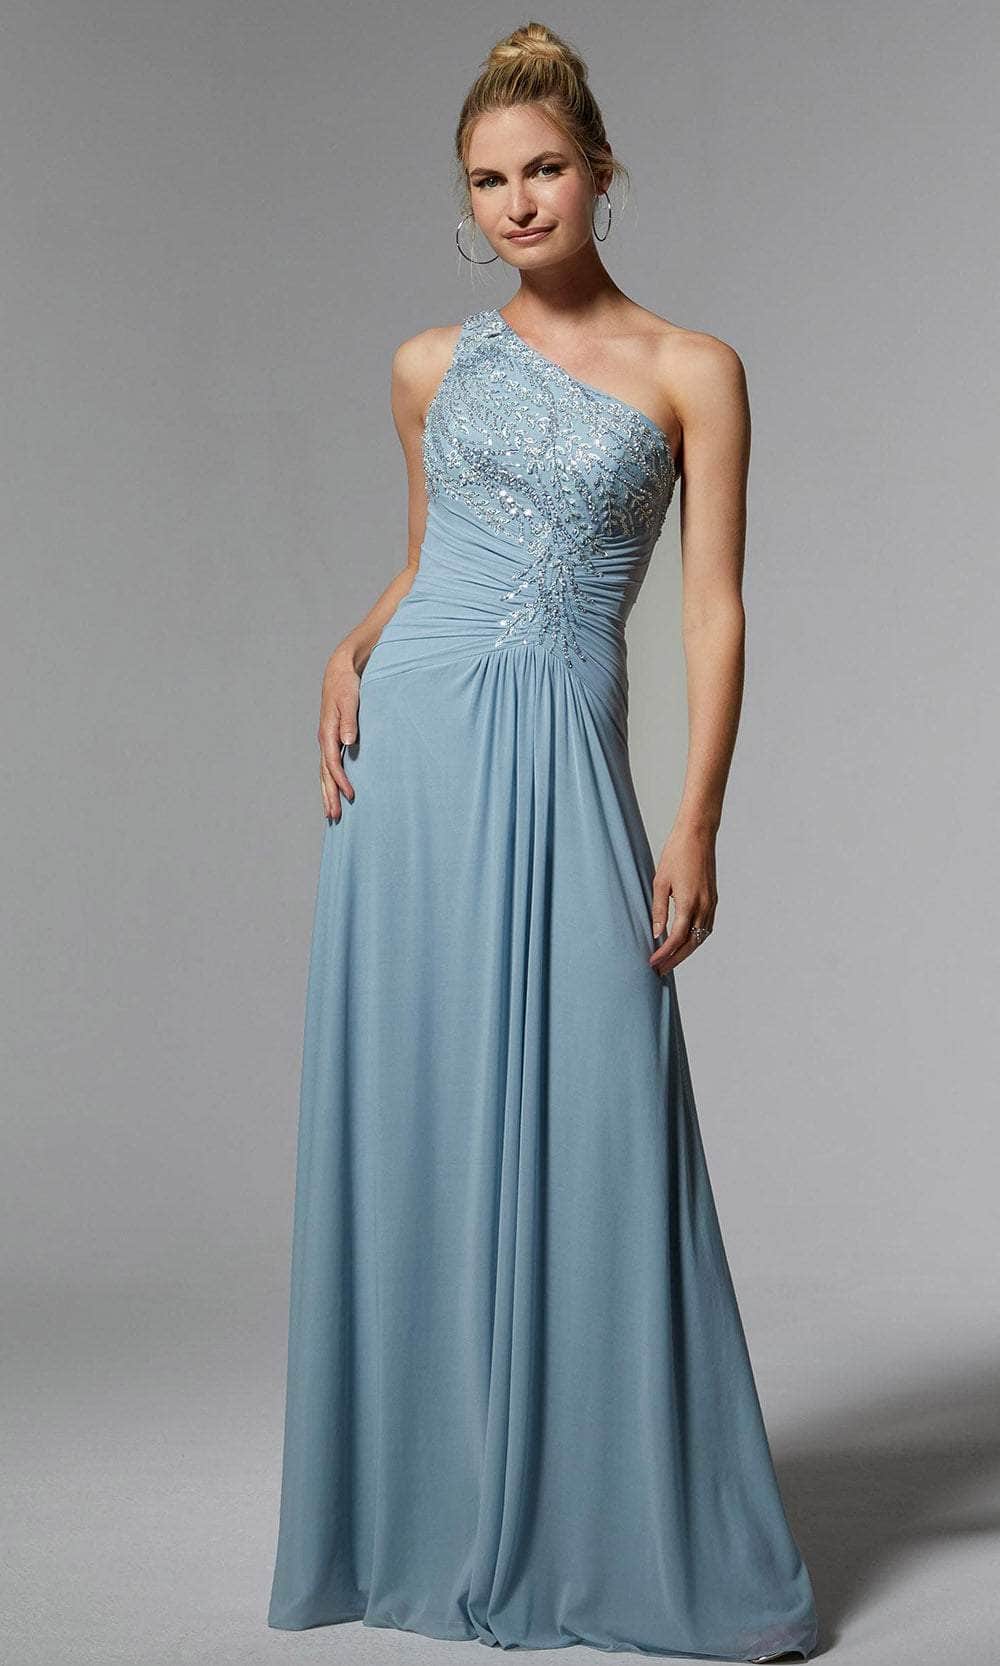 Image of MGNY By Mori Lee 72910 - Ruched Waist Evening Dress